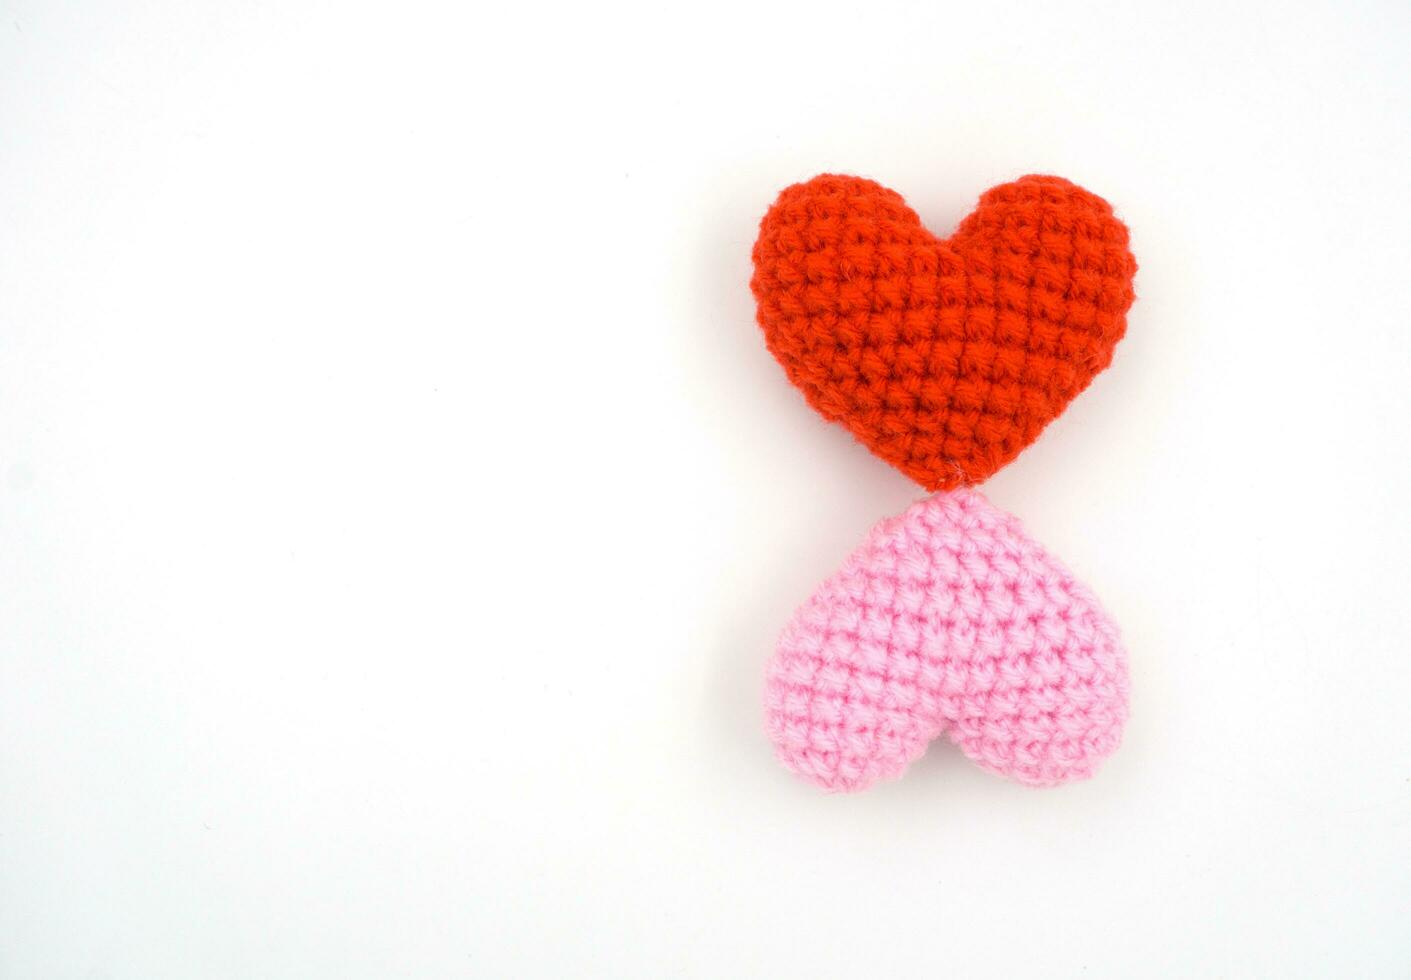 Heart made from yarn on a white background. photo